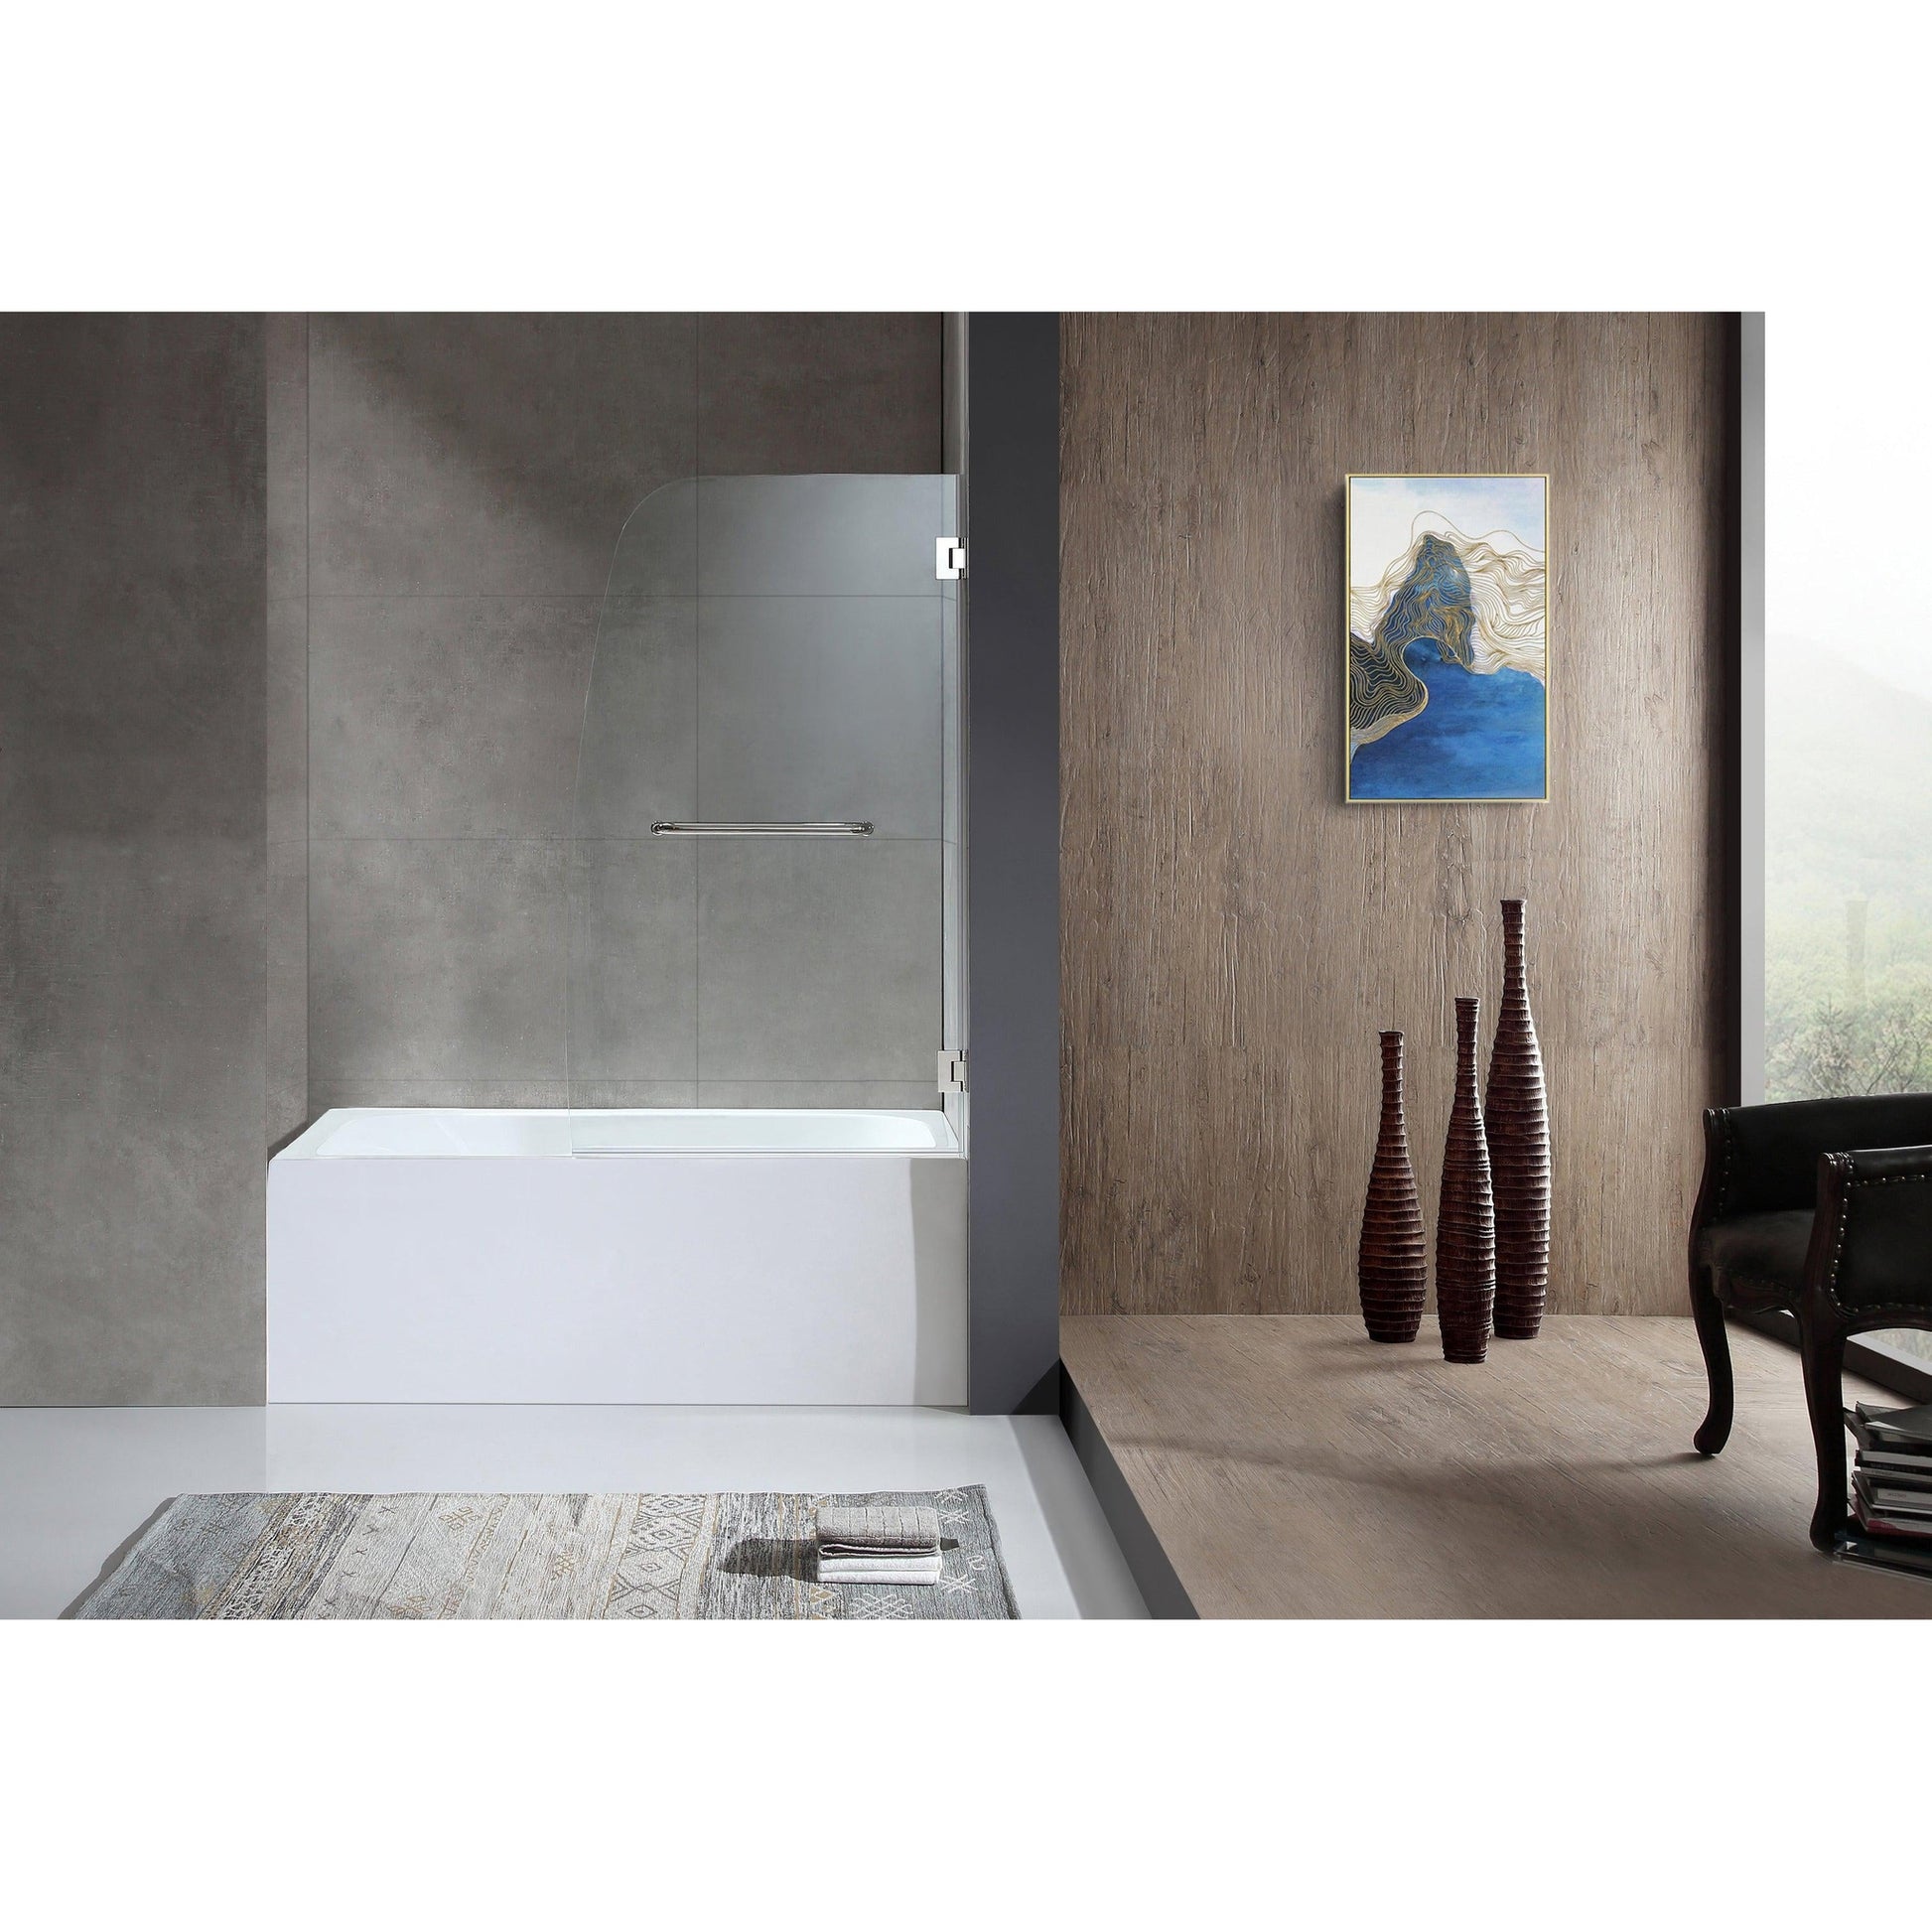 ANZZI Grand Series White "60 x 32" Alcove Right Drain Rectangular Bathtub With Built-In Flange and Frameless Polished Chrome Hinged Door